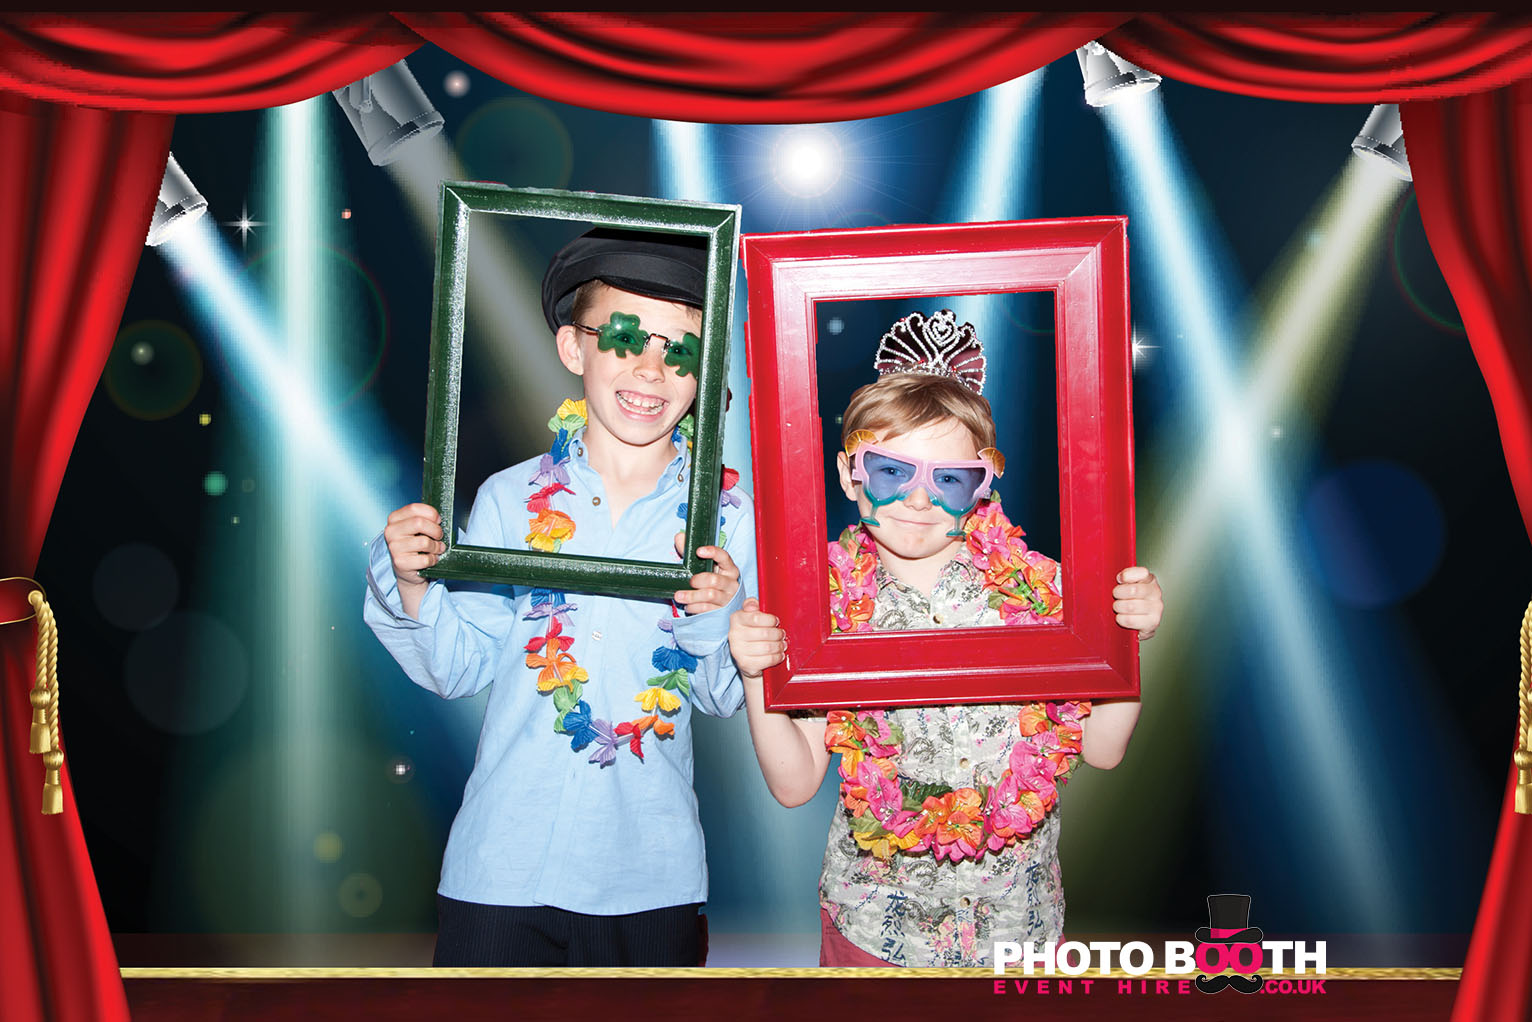 Photo Booth Event Hire.co.uk